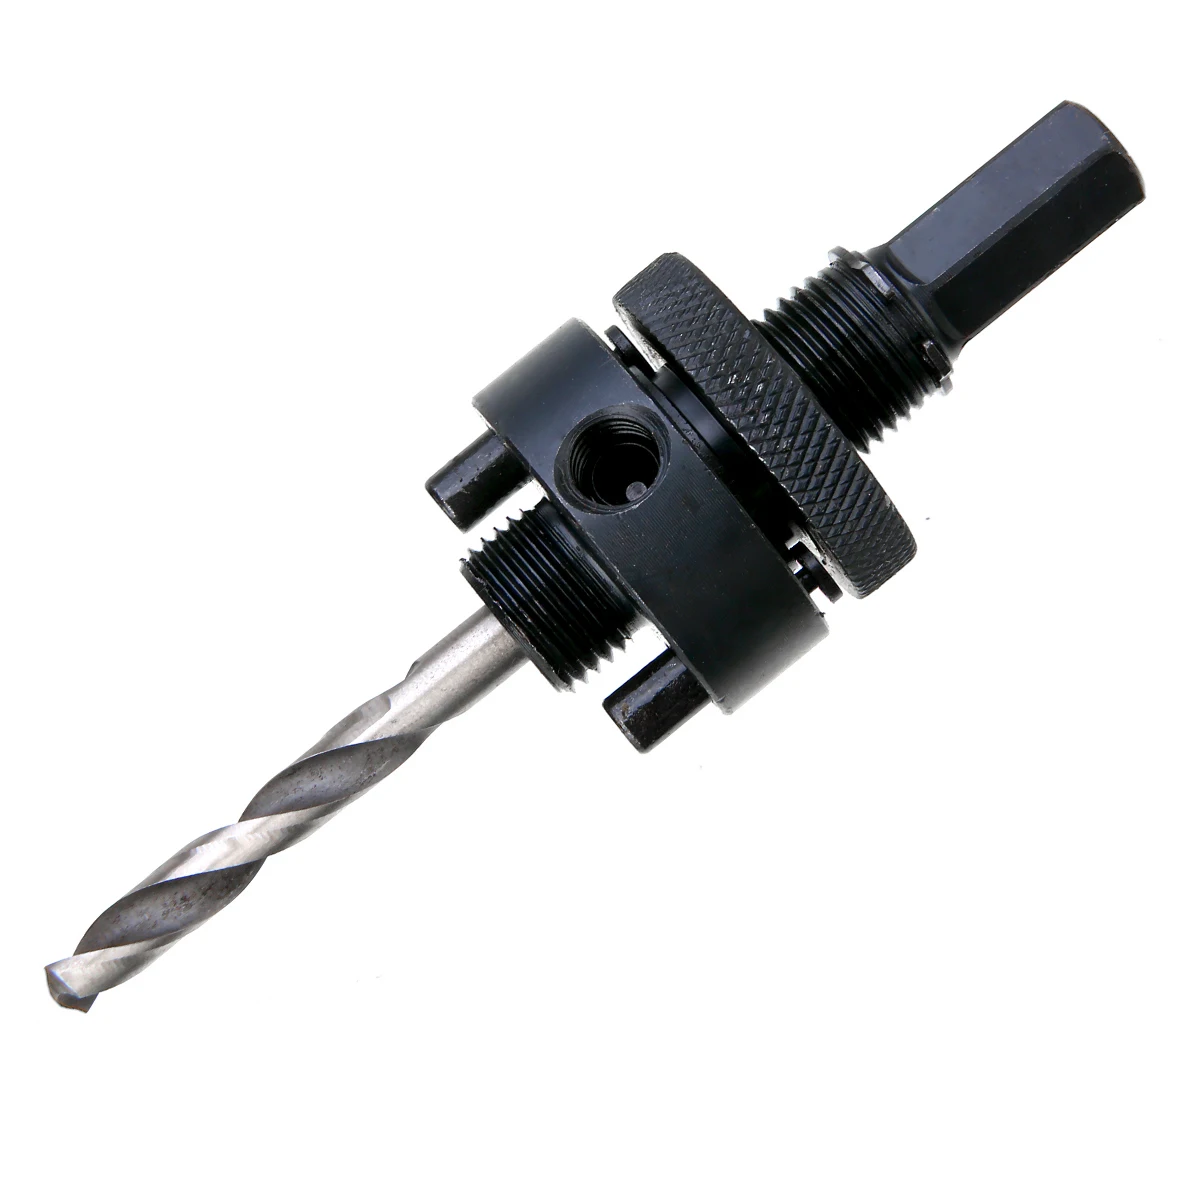 

1pcs Hole Saw Arbor Cutting Drills Steel Metal Cutter Hole Saw Arbor Hex Shank Core Drill Bits For 32mm-210mm Mandrels Saws